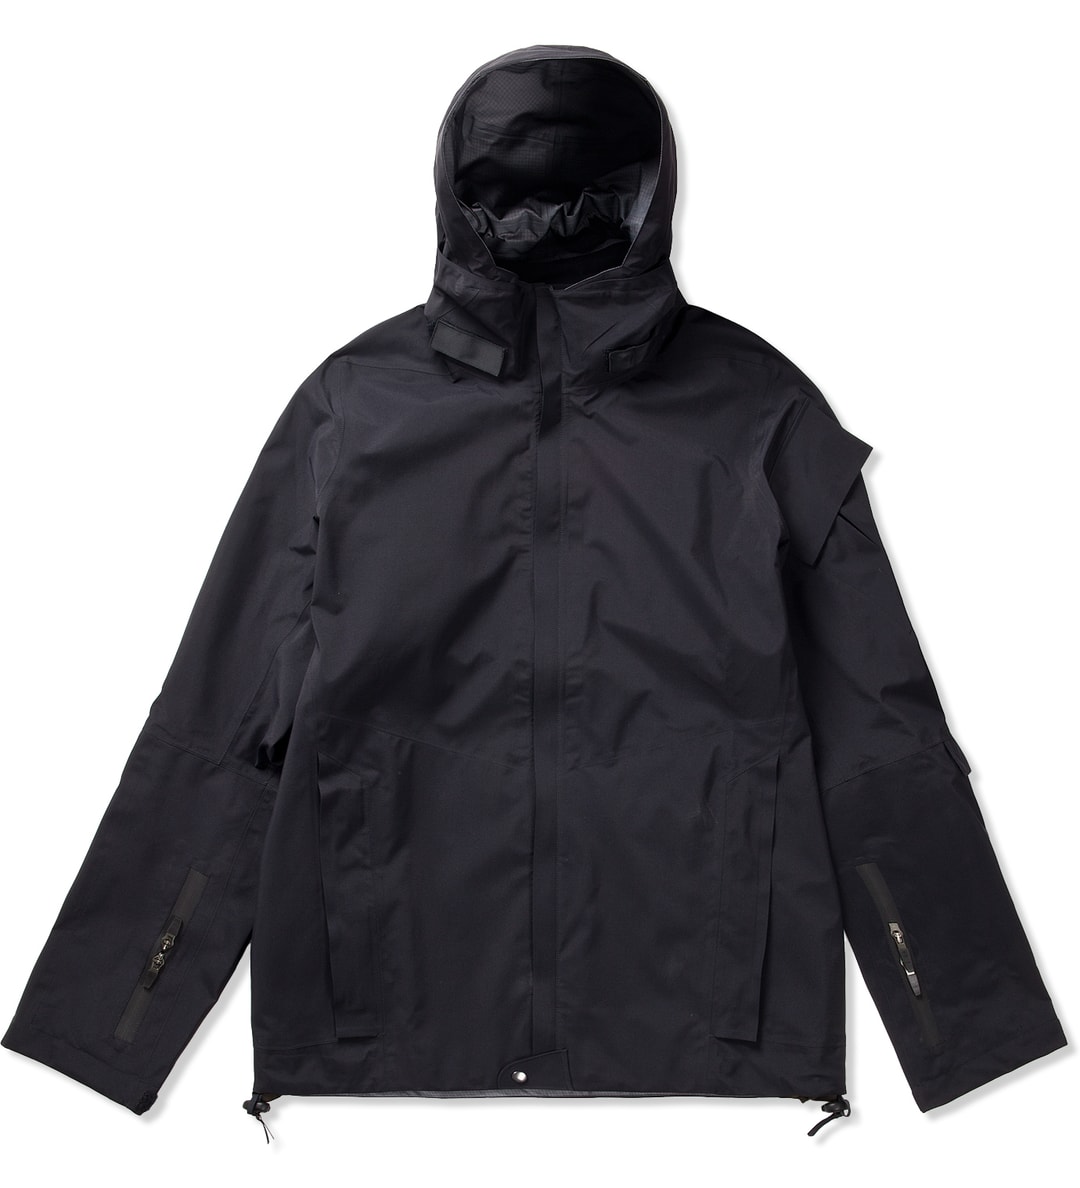 ACRONYM - Black J32-GT Jacket | HBX - Globally Curated Fashion and ...